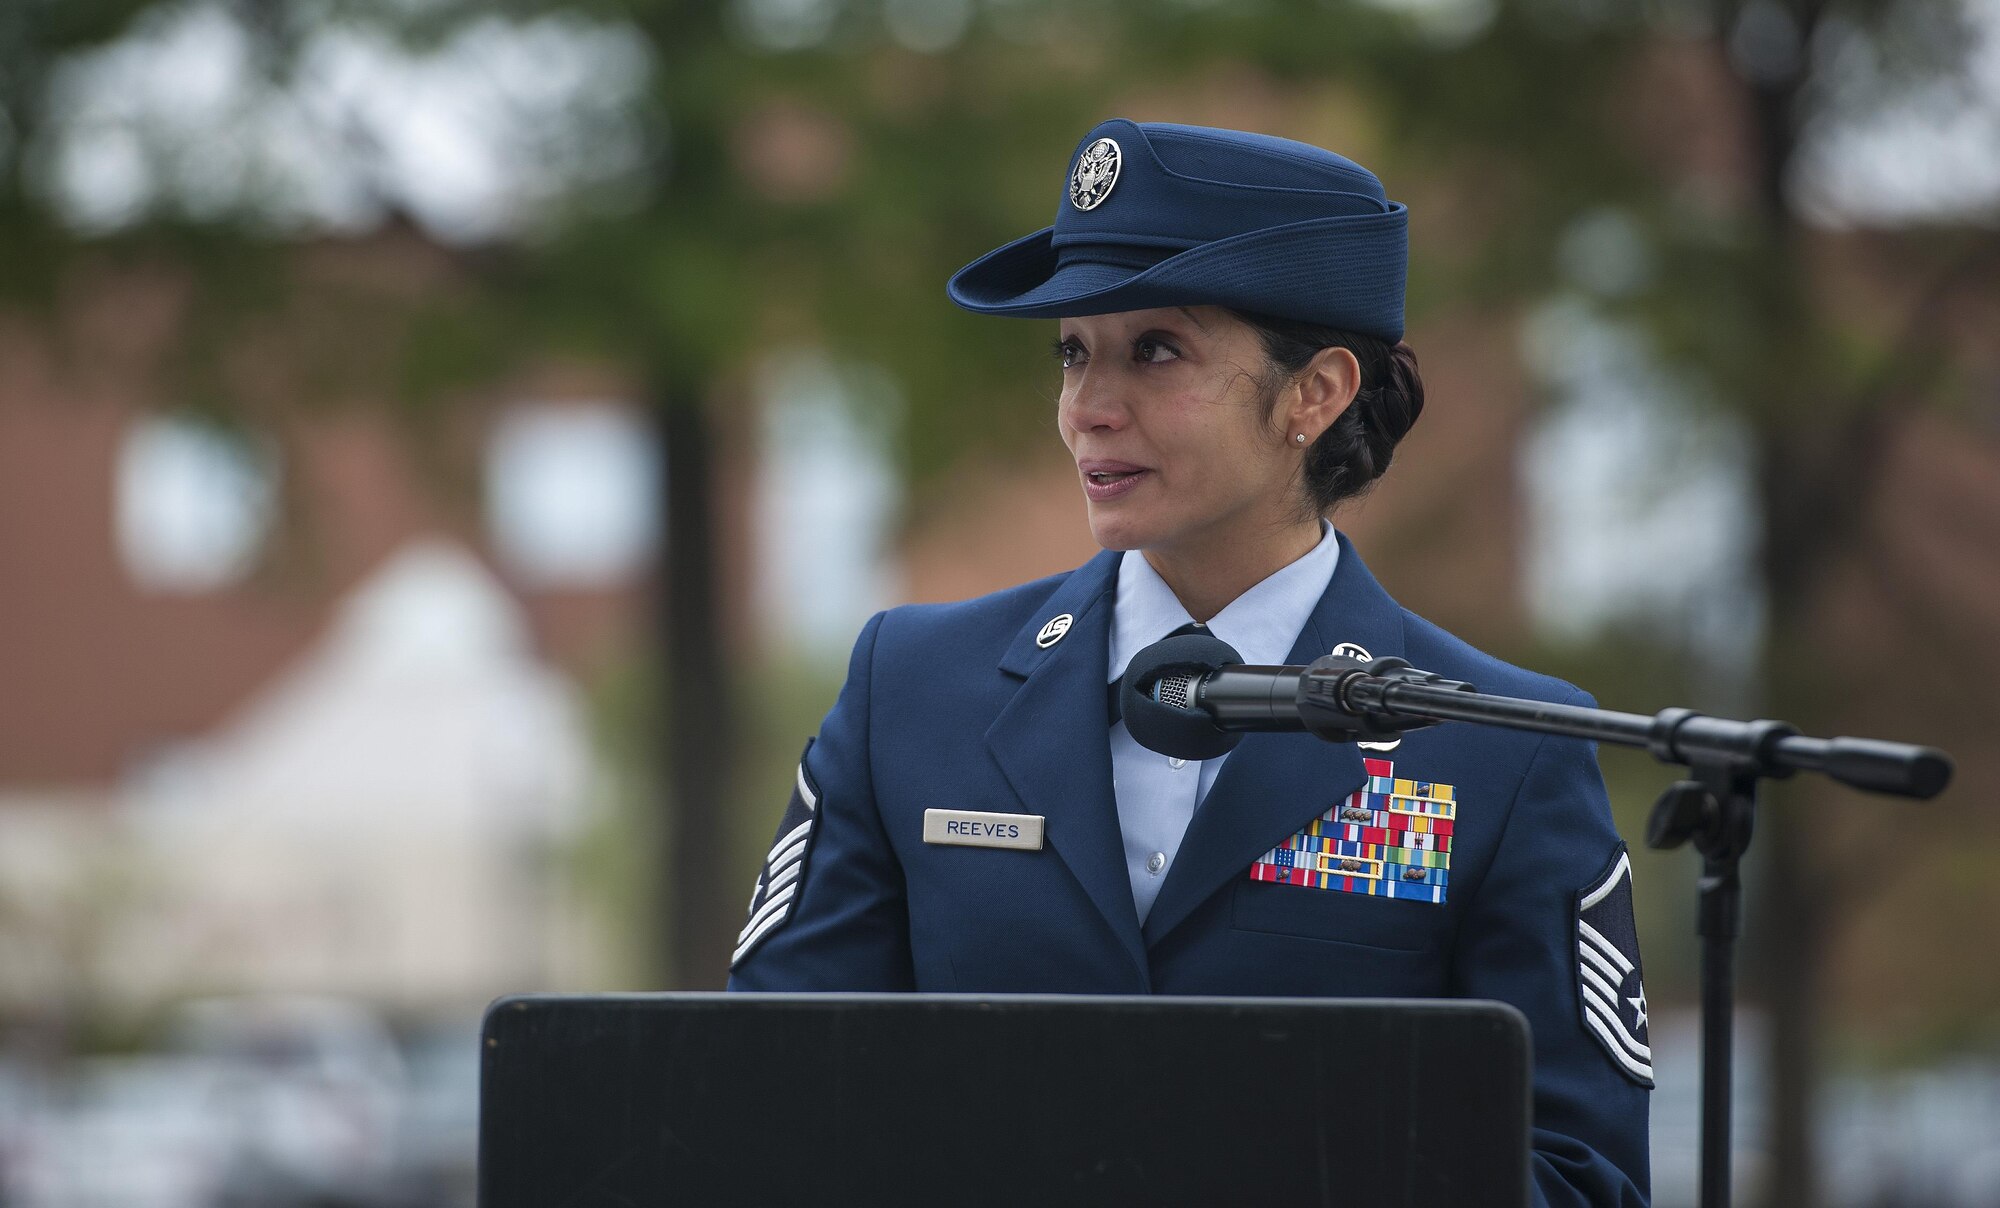 Master Sgt. Vanessa Reeves, Prisoner of War/Missing in Action committee chairman, cries during her speech at a POW/MIA closing ceremony at Joint Base Langley-Eustis, Va., Sept. 16, 2016. The ceremony was held as a remembrance event to the honor the service and sacrifice of more than 150,000 POWs who have served throughout history and more than 83, 400 Americans who are still missing today. (U.S. Air Force photo by Staff Sgt. Nick Wilson/Released)